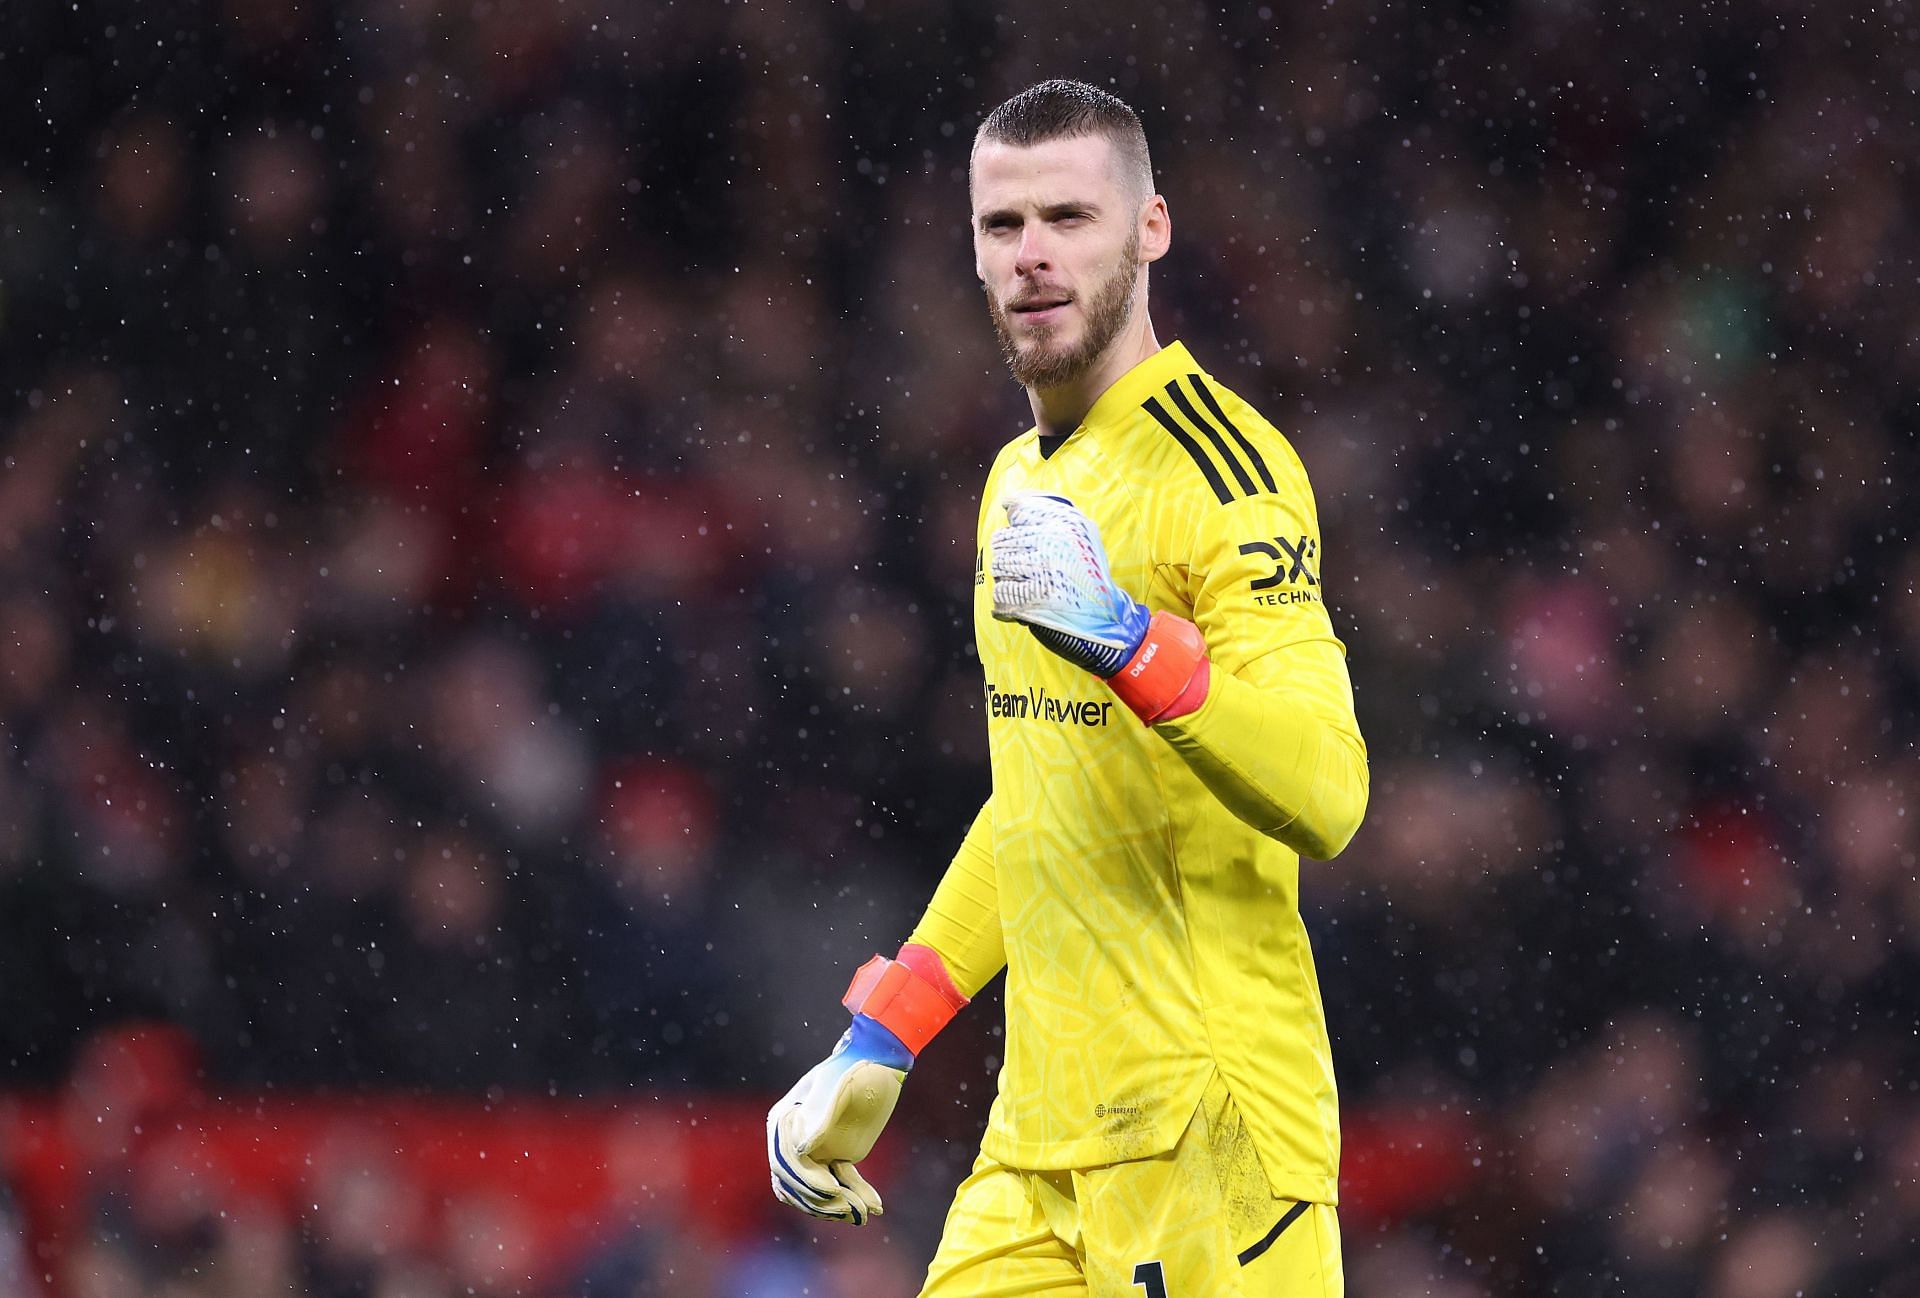 David De Gea wants to continue with Manchester United